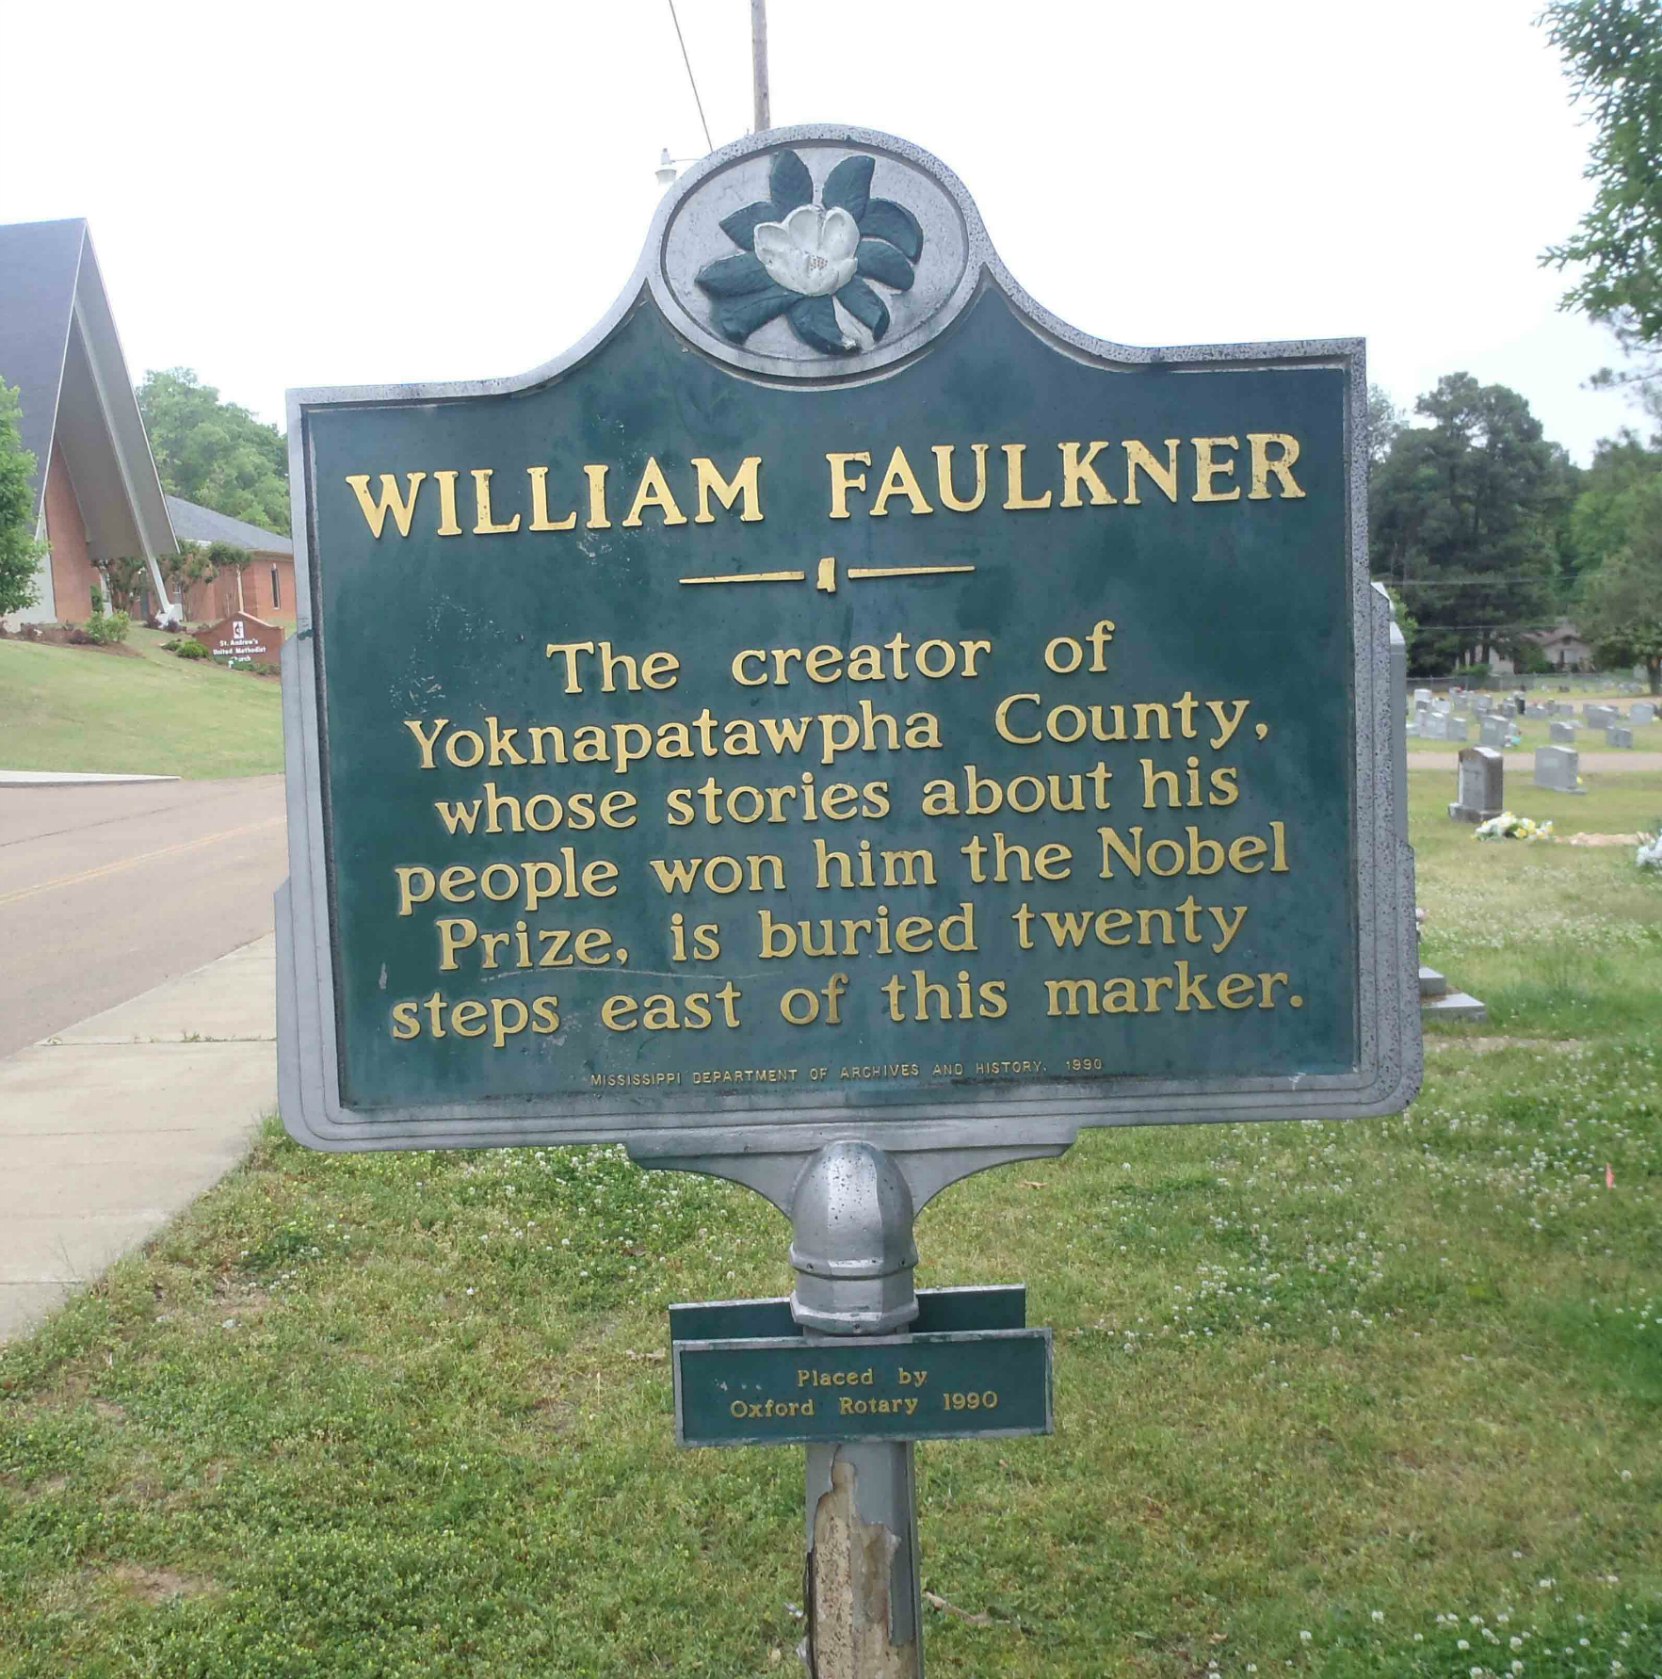 Mississippi Department of Archives & History marker for William Faulkner is located 20 paces from William Faulkner's grave in Oxford, Mississippi.